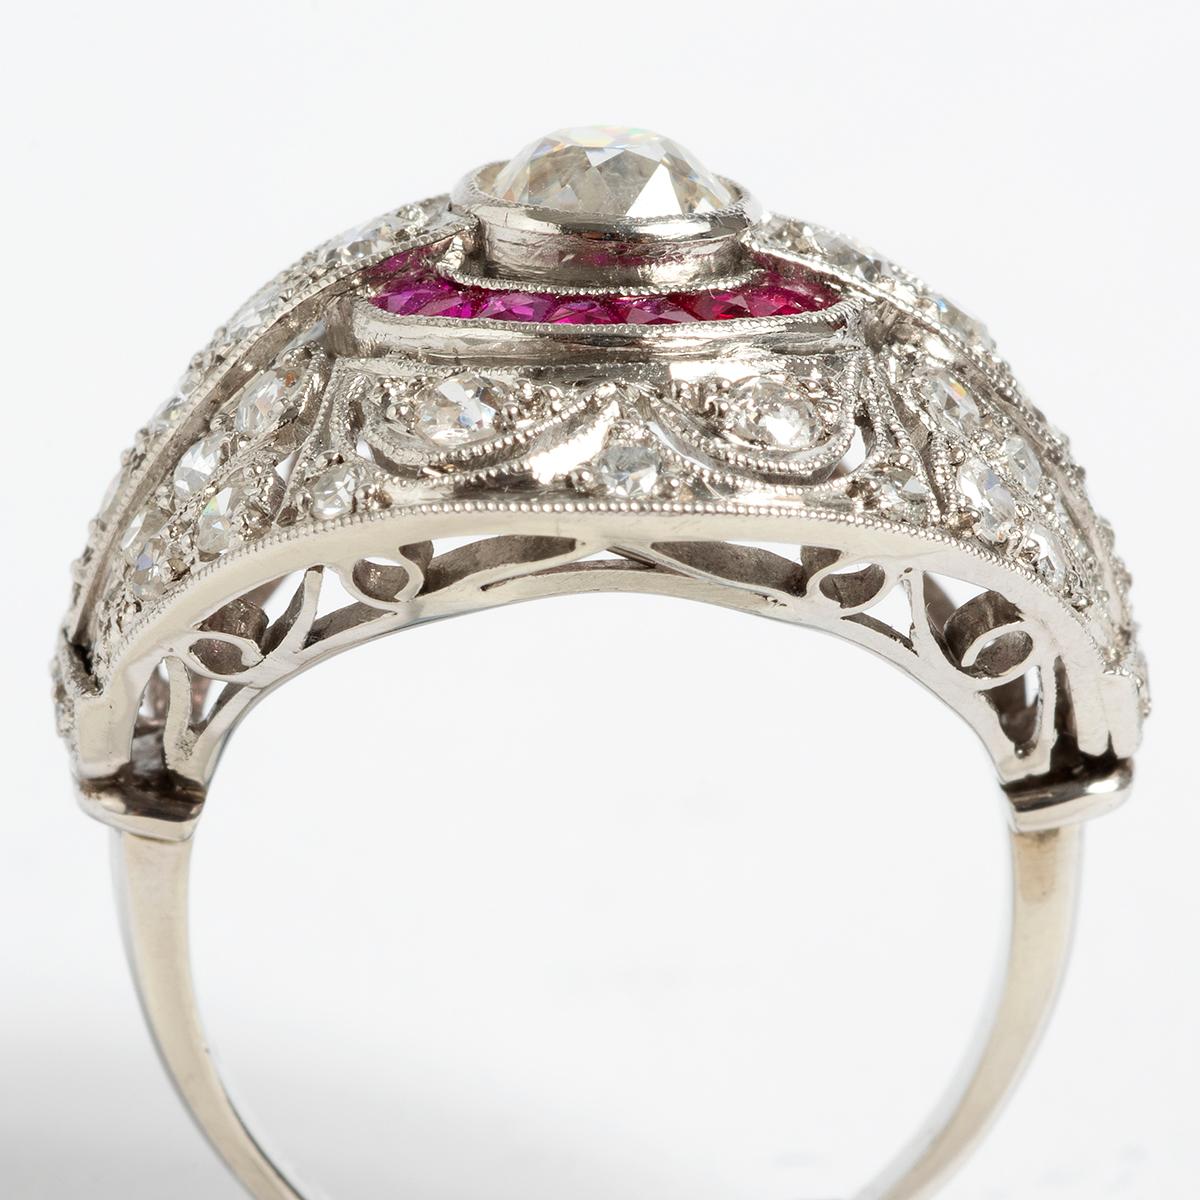 Mixed Cut 'Art Deco Style' Platinum & Ruby Cluster Ring. US Size 6. Statement Piece. For Sale